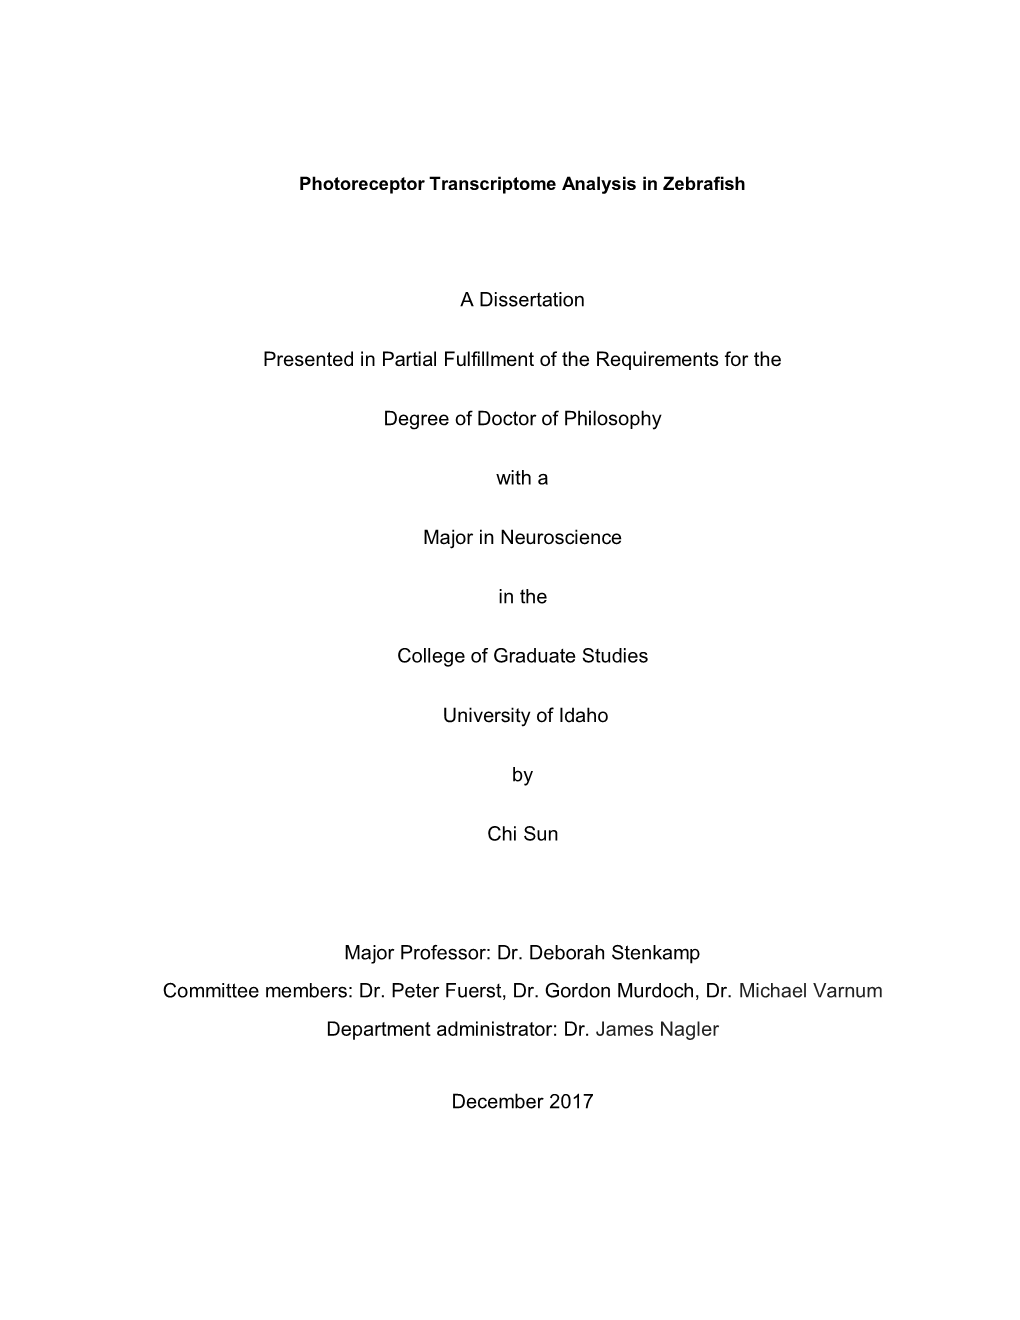 A Dissertation Presented in Partial Fulfillment of the Requirements For